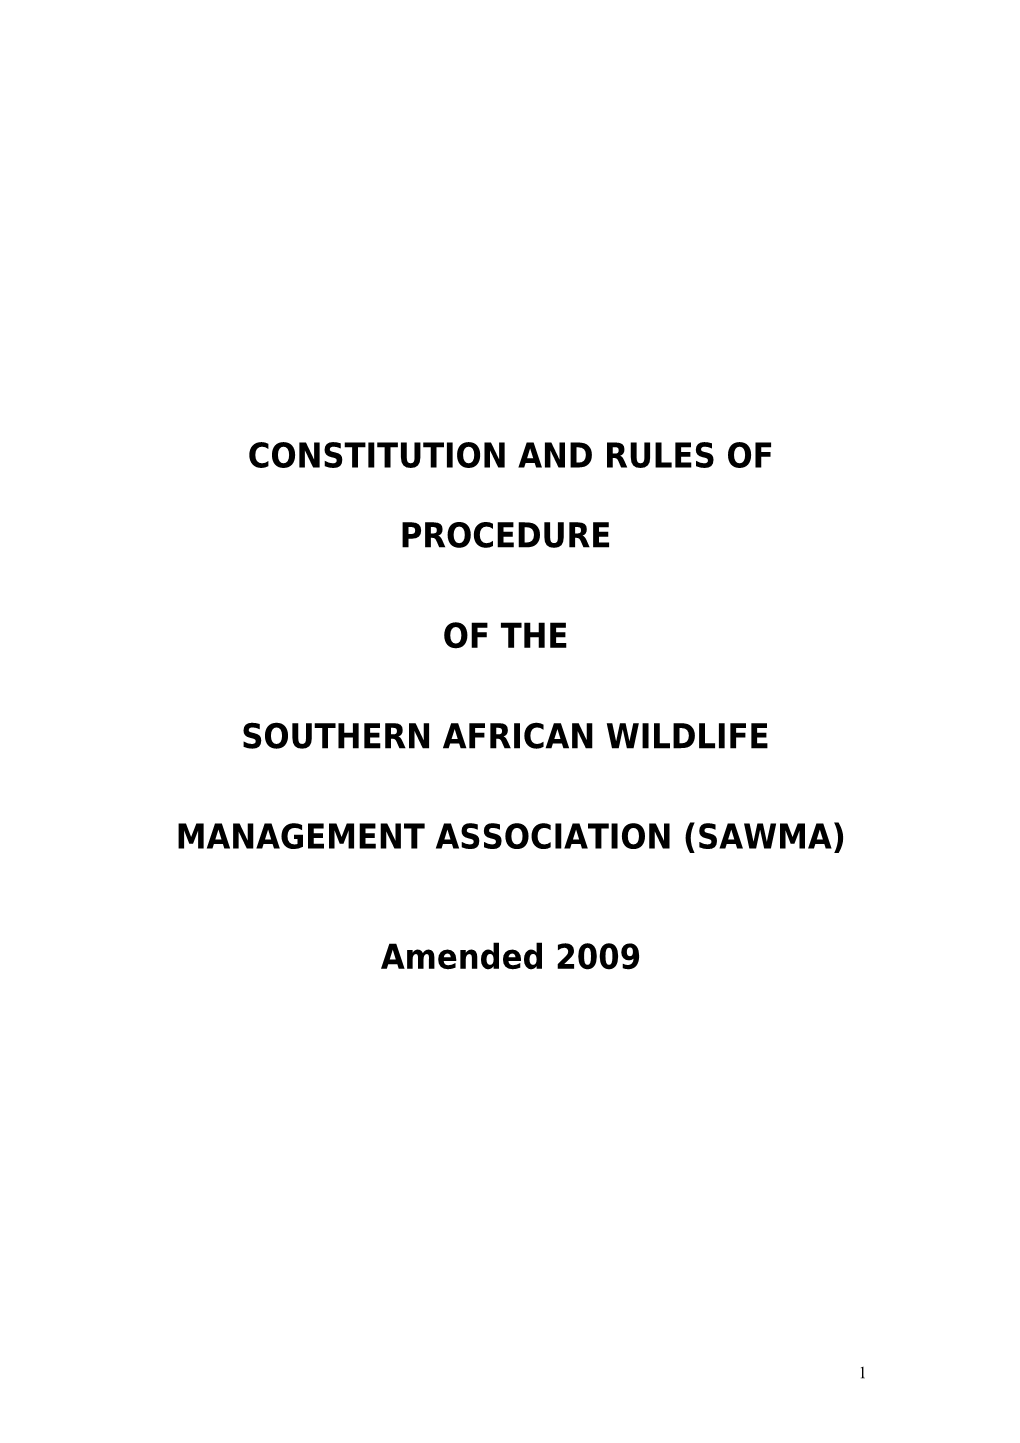 Constitution and Rules of Procedure